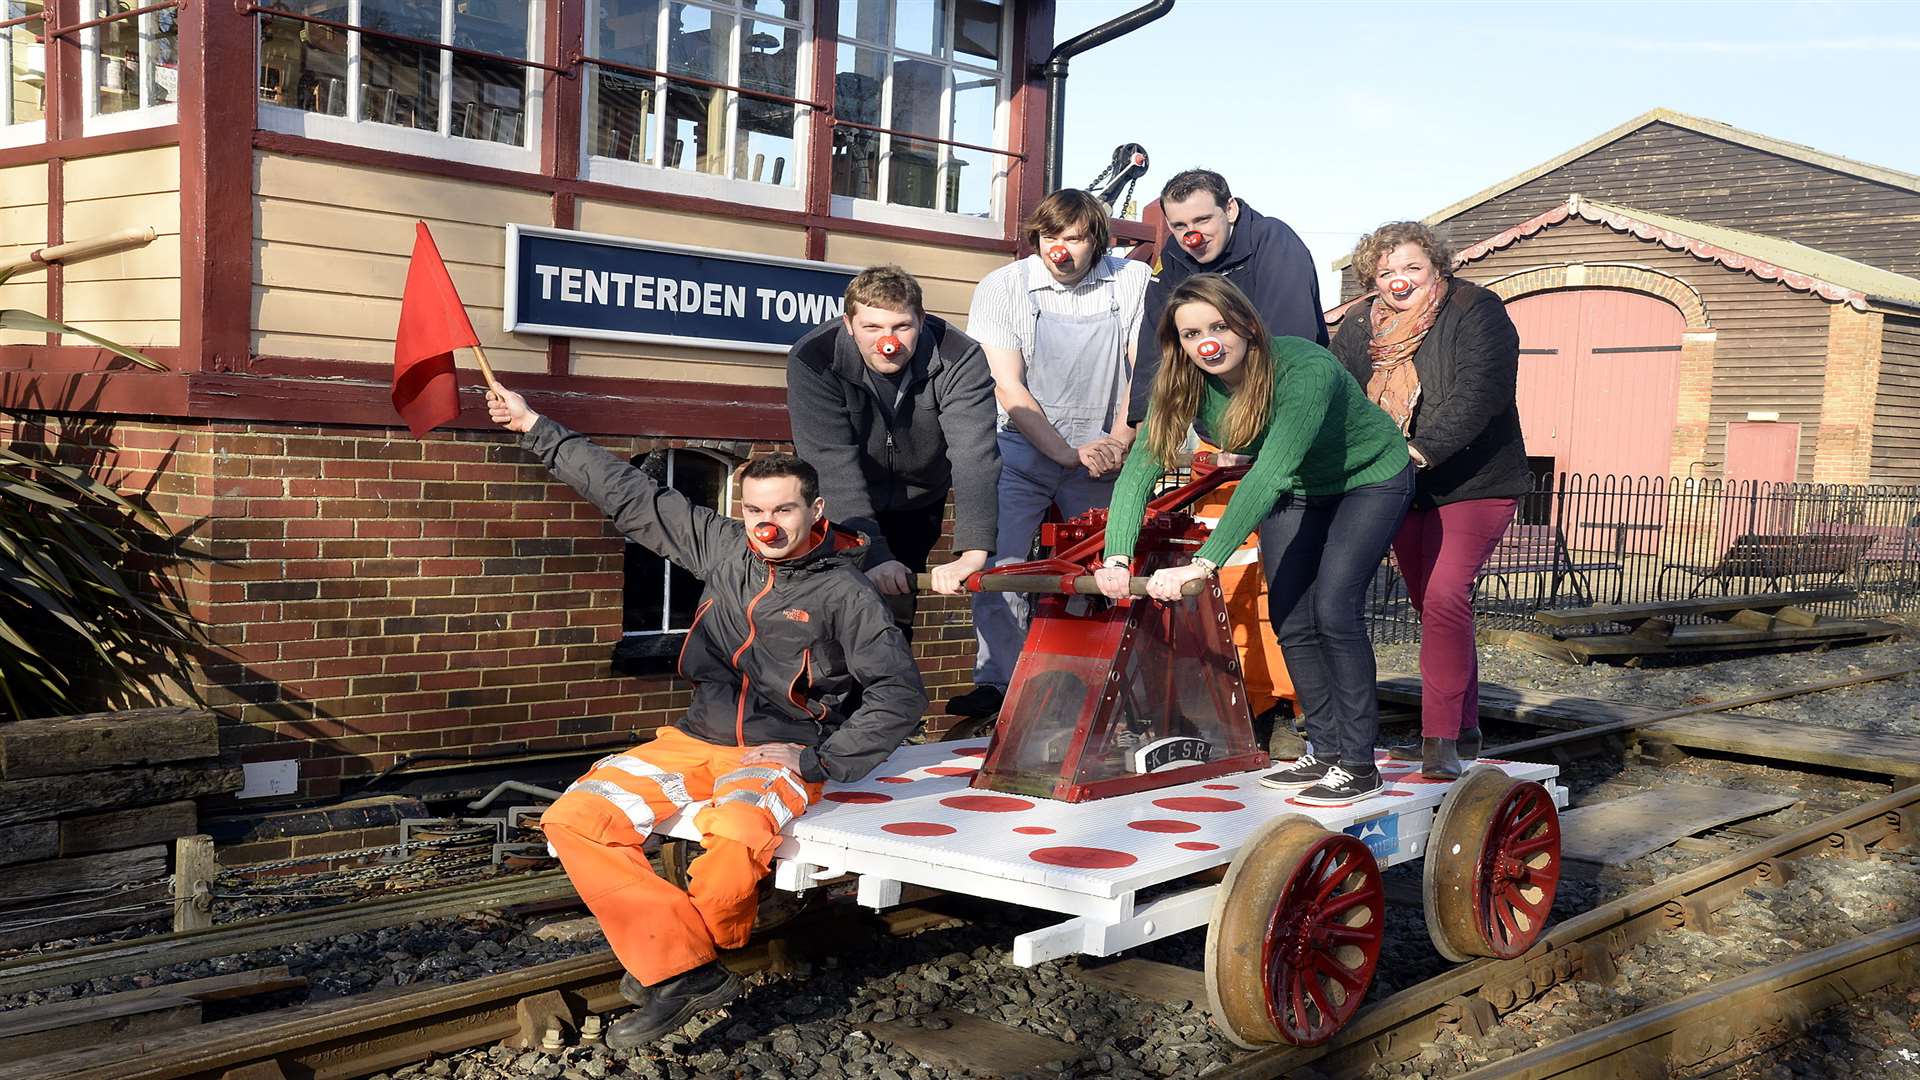 Kent & East Sussex Railway staff and volunteers James Taylor, Andy Hardy, Richard Stone and Jamie Douglas with Jenna Hosmer and Debbie Kilgannon who are undertaking a 100-mile pump trolley challenge for Comic Relief. Picture: Chris Davey/Kent & East Sussex Railway